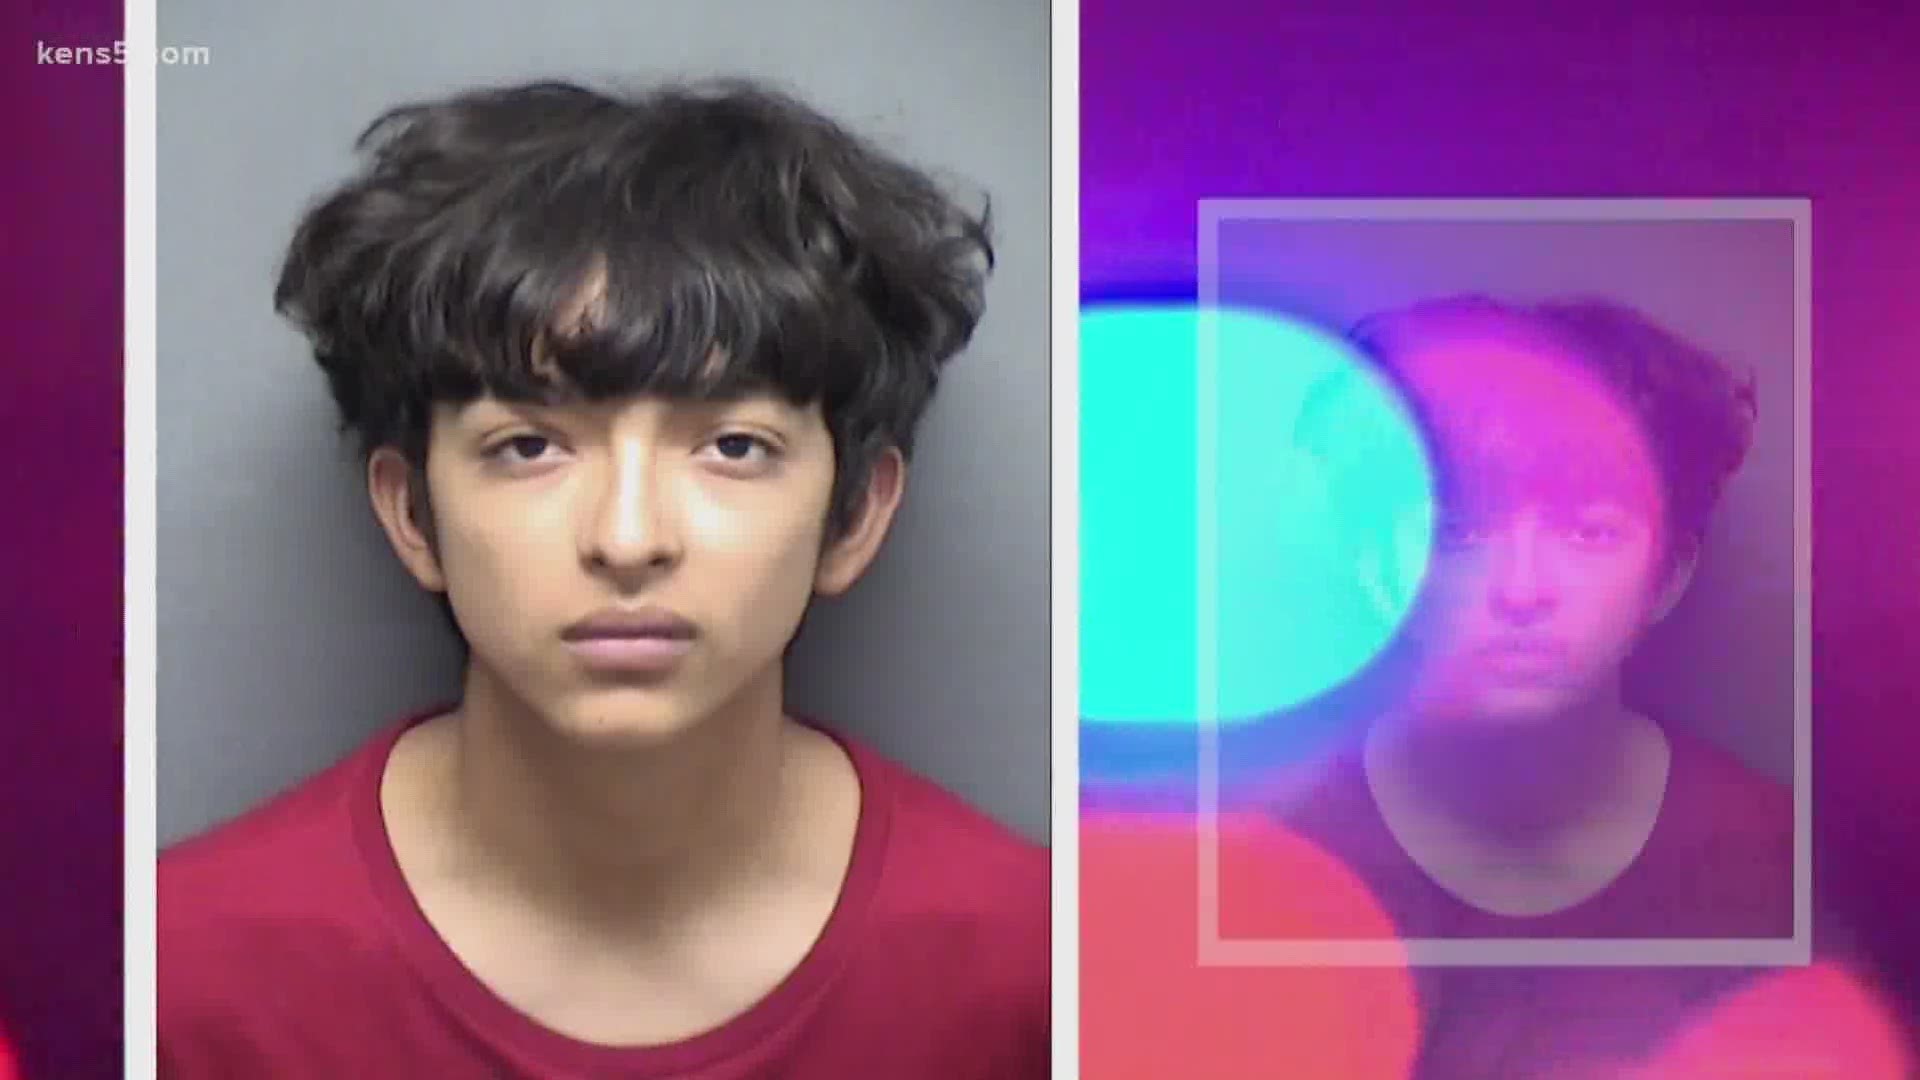 San Antonio Police say 18-year-old Juan Pablo Macias is one of several suspects in a robbery of a 72-year-old man, who was shot.